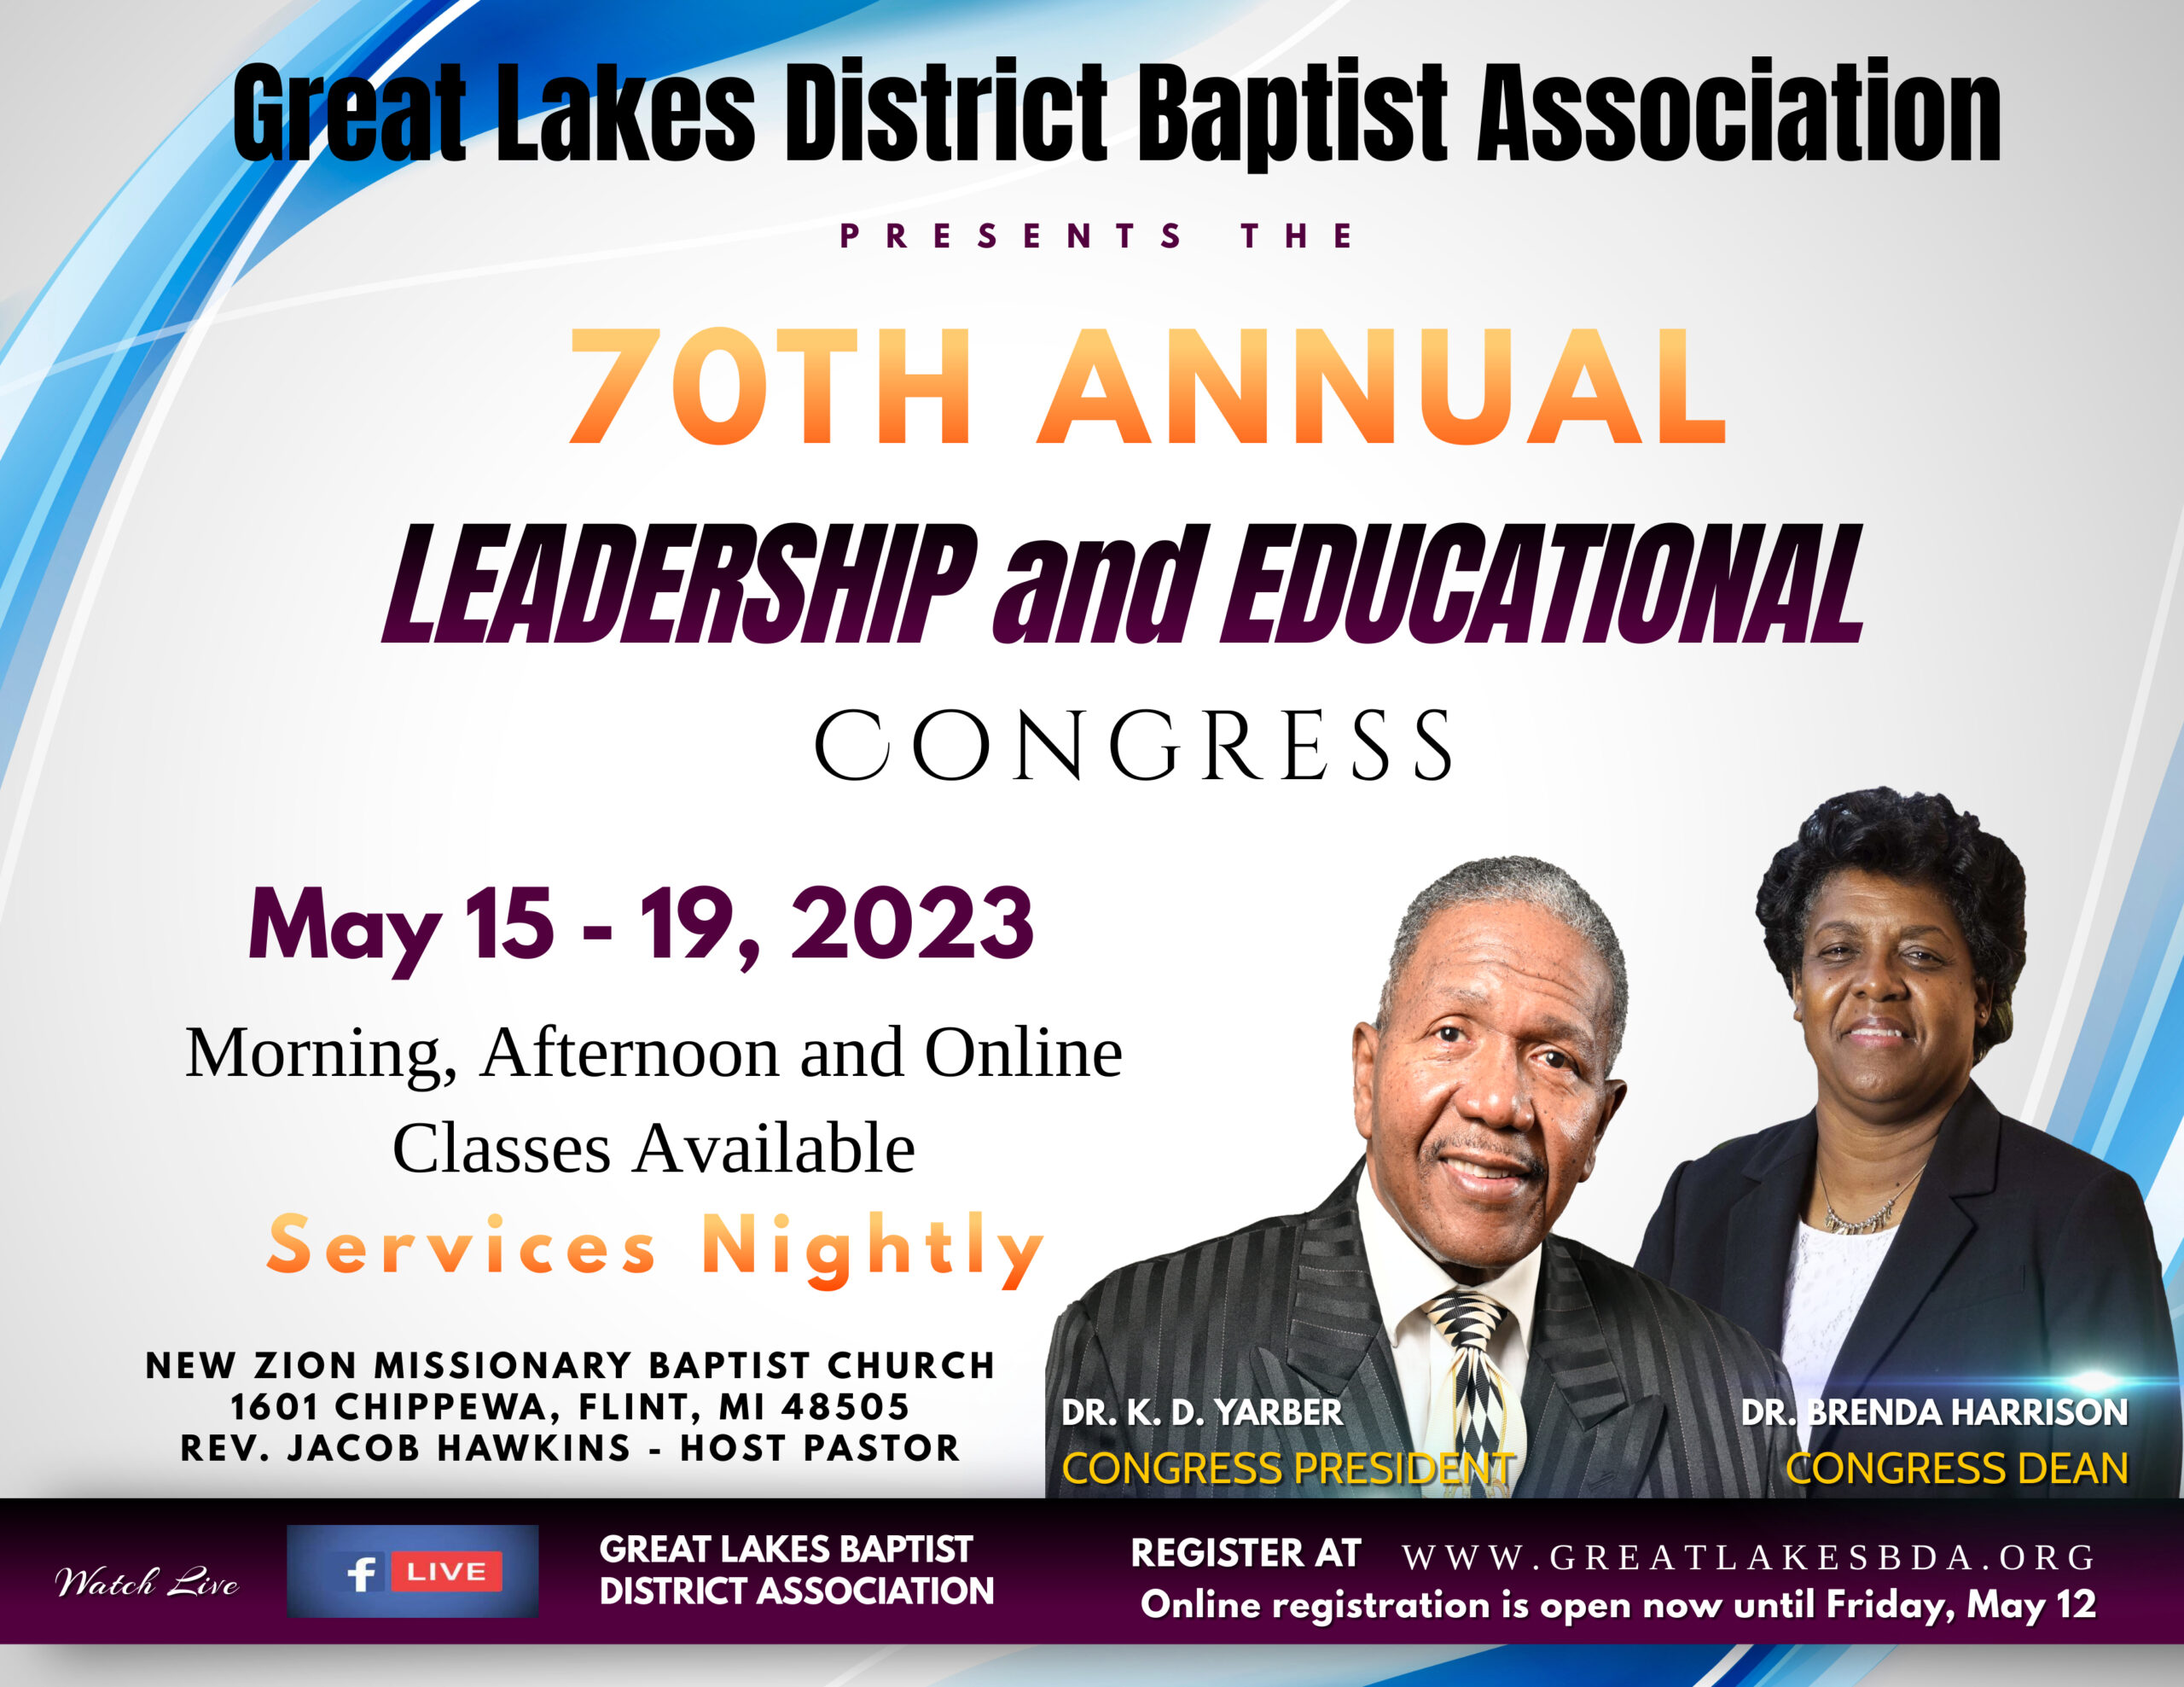 Great Lakes District Baptist Association 70th Annual Leadership and Educational Congress